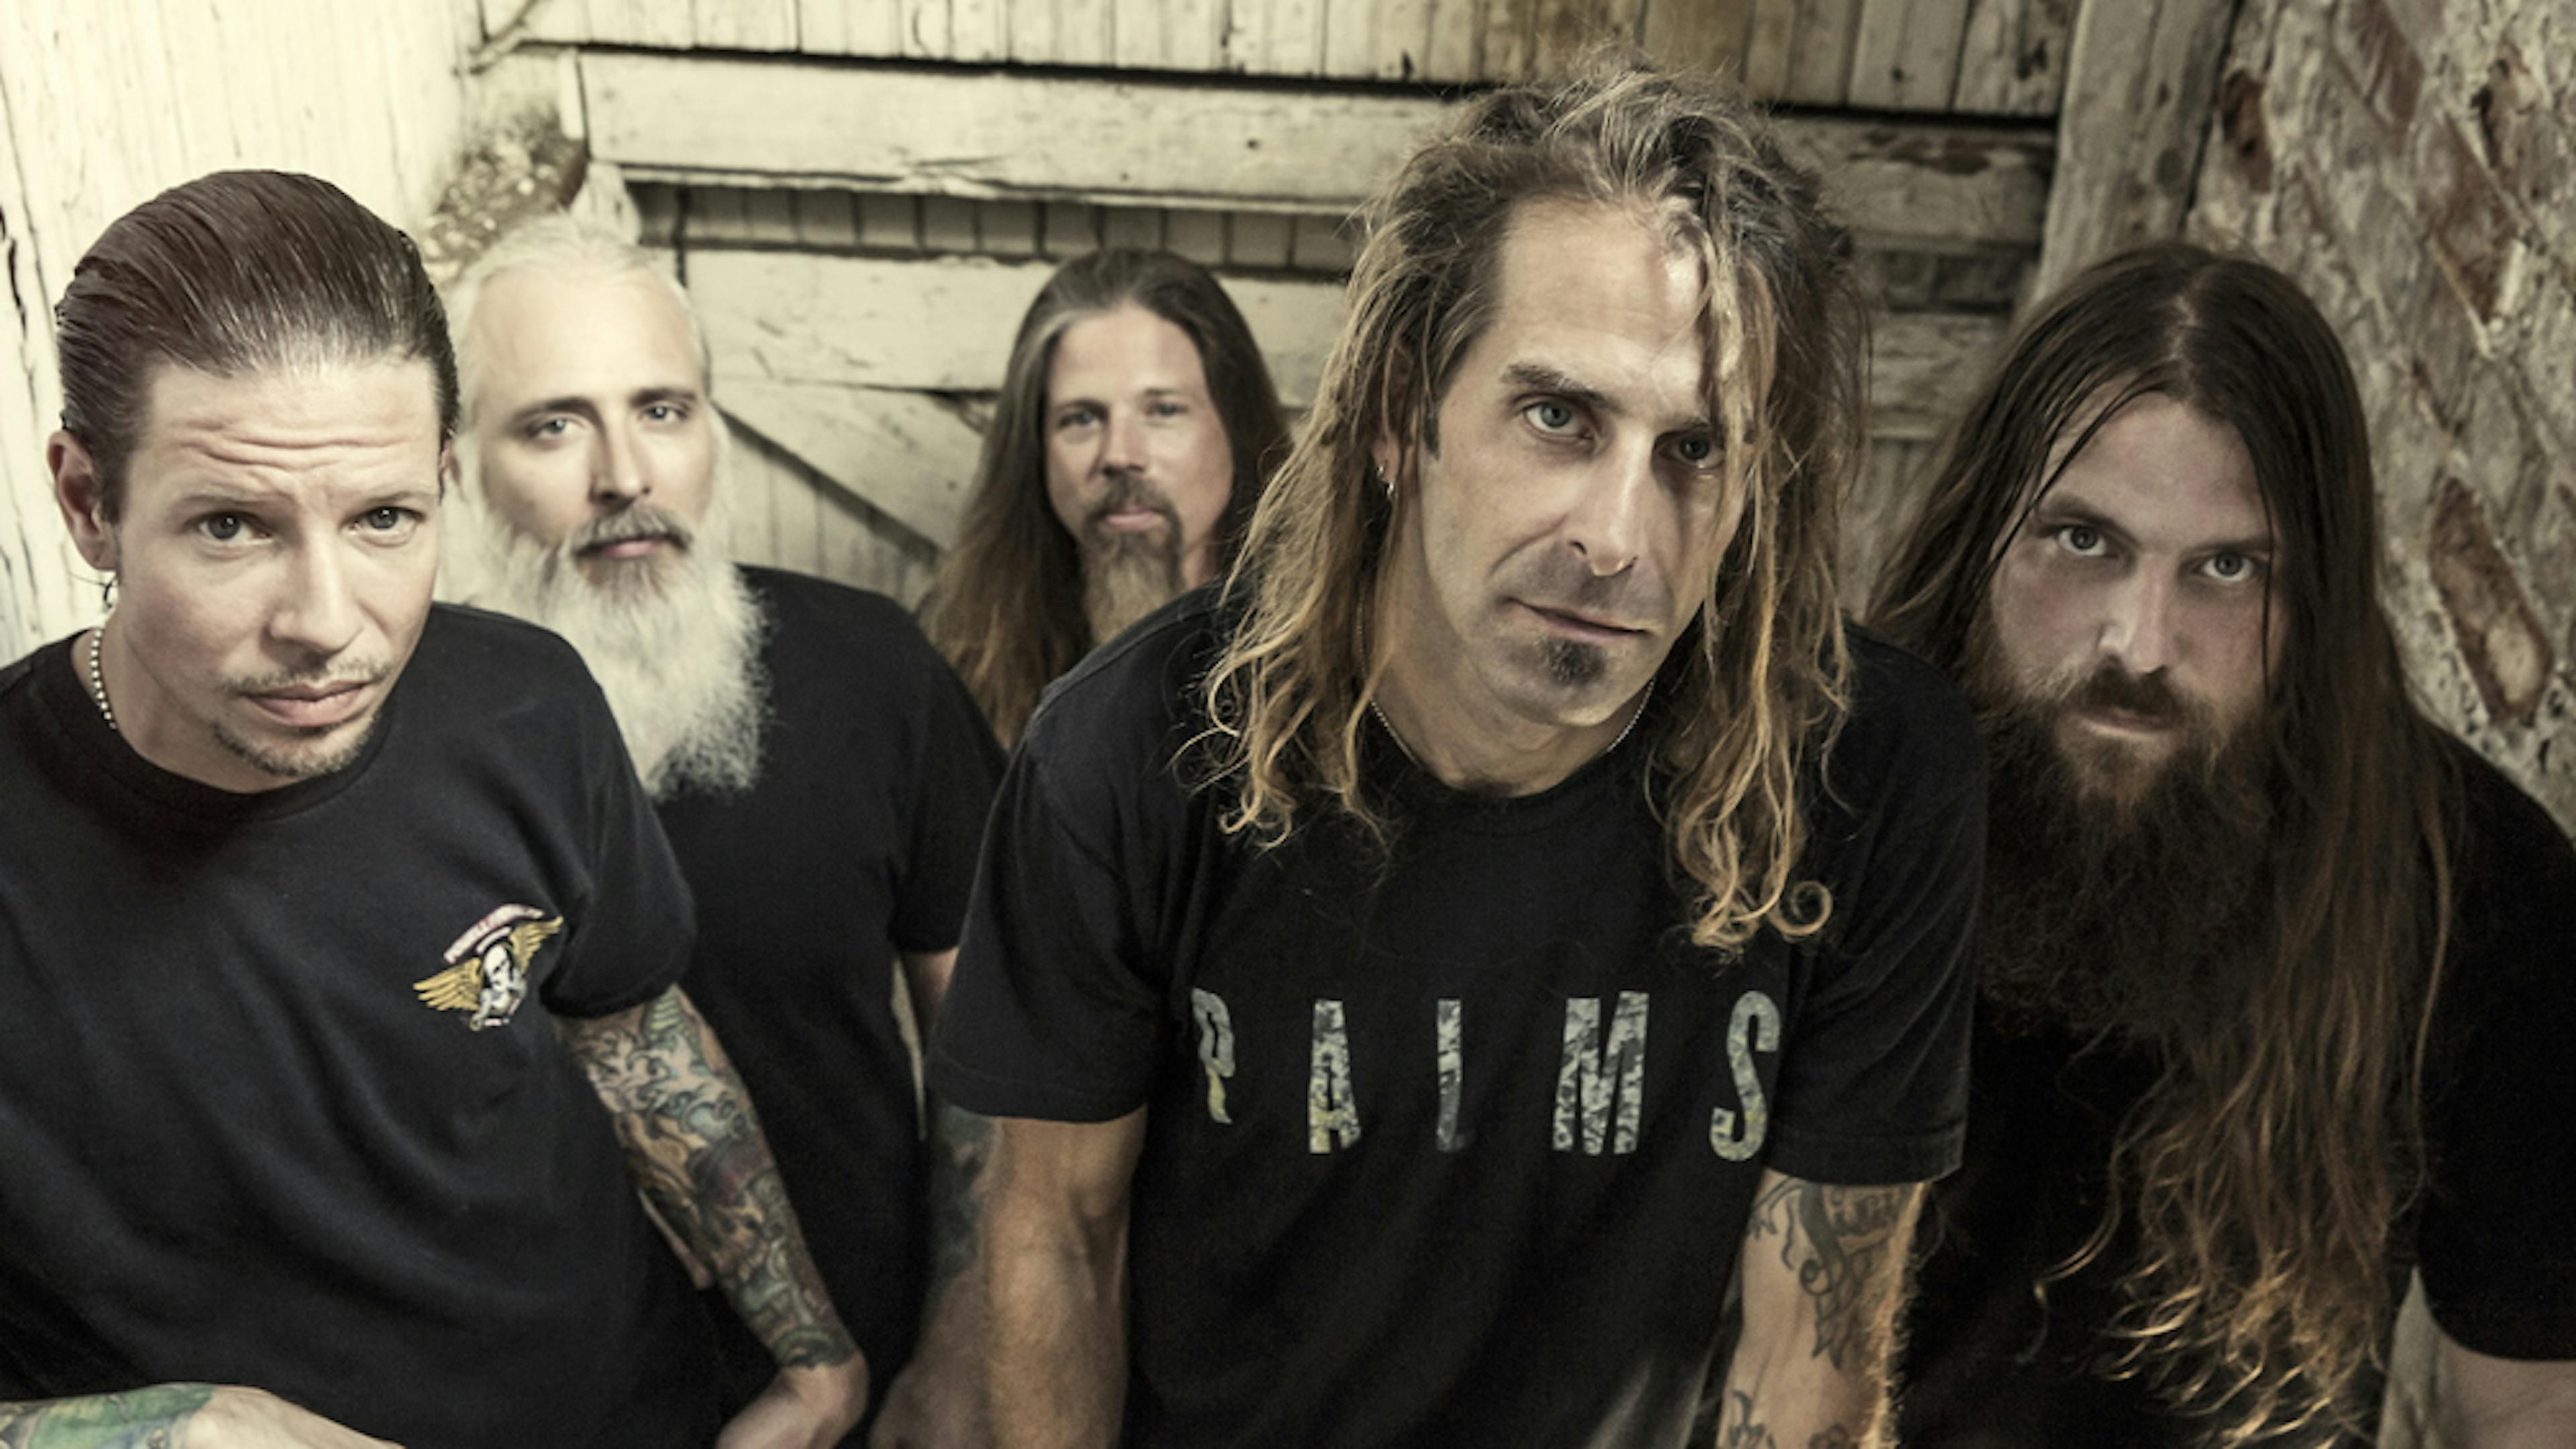 Idiot Tries To Sell Lamb Of God's Stolen Guitar Online